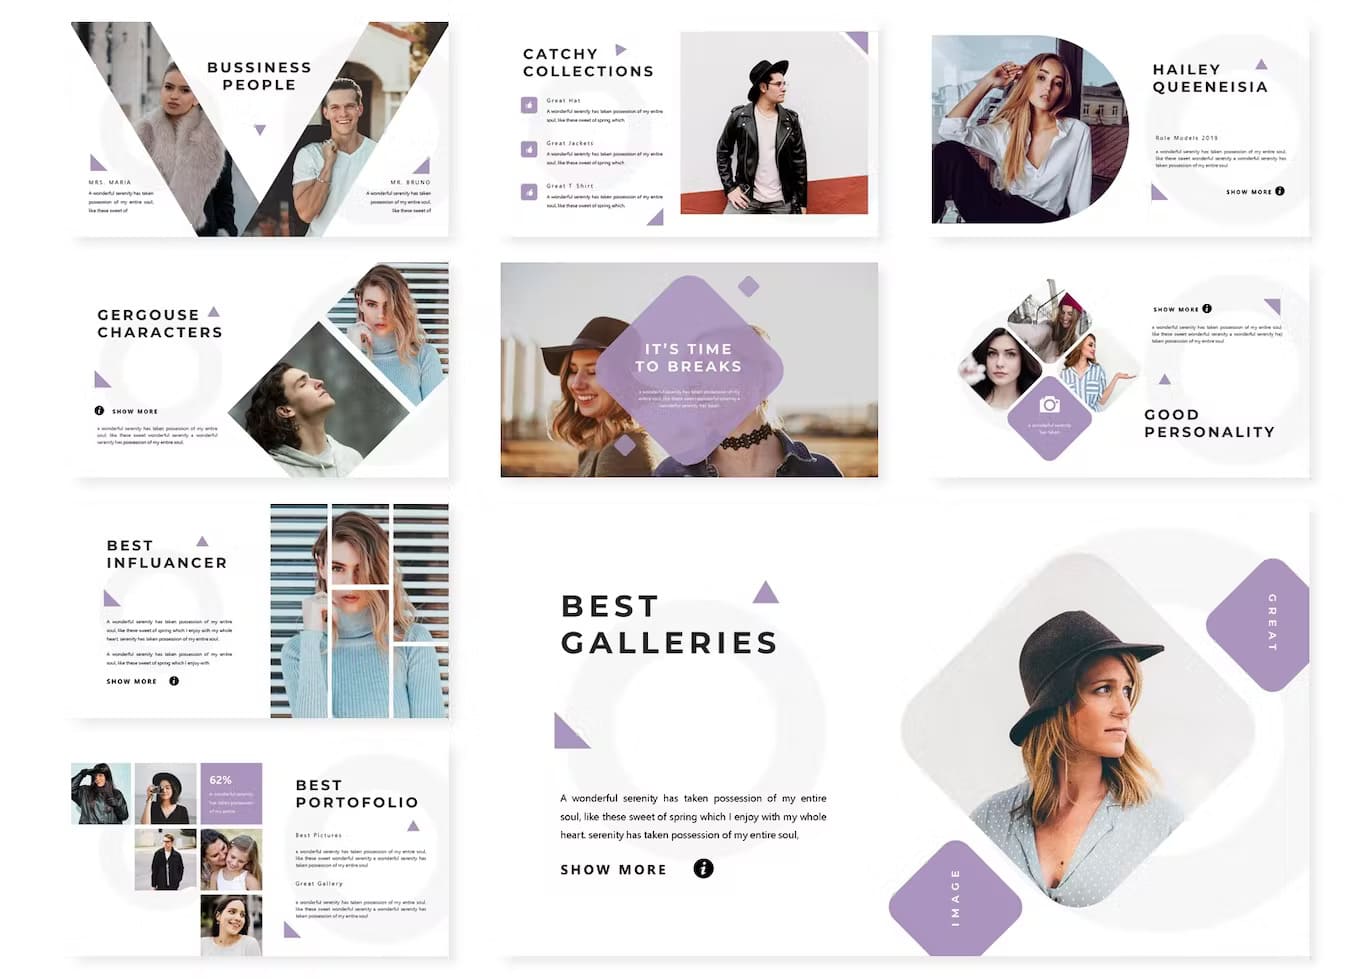 Images of bussiness people for Happines | Keynote Template.